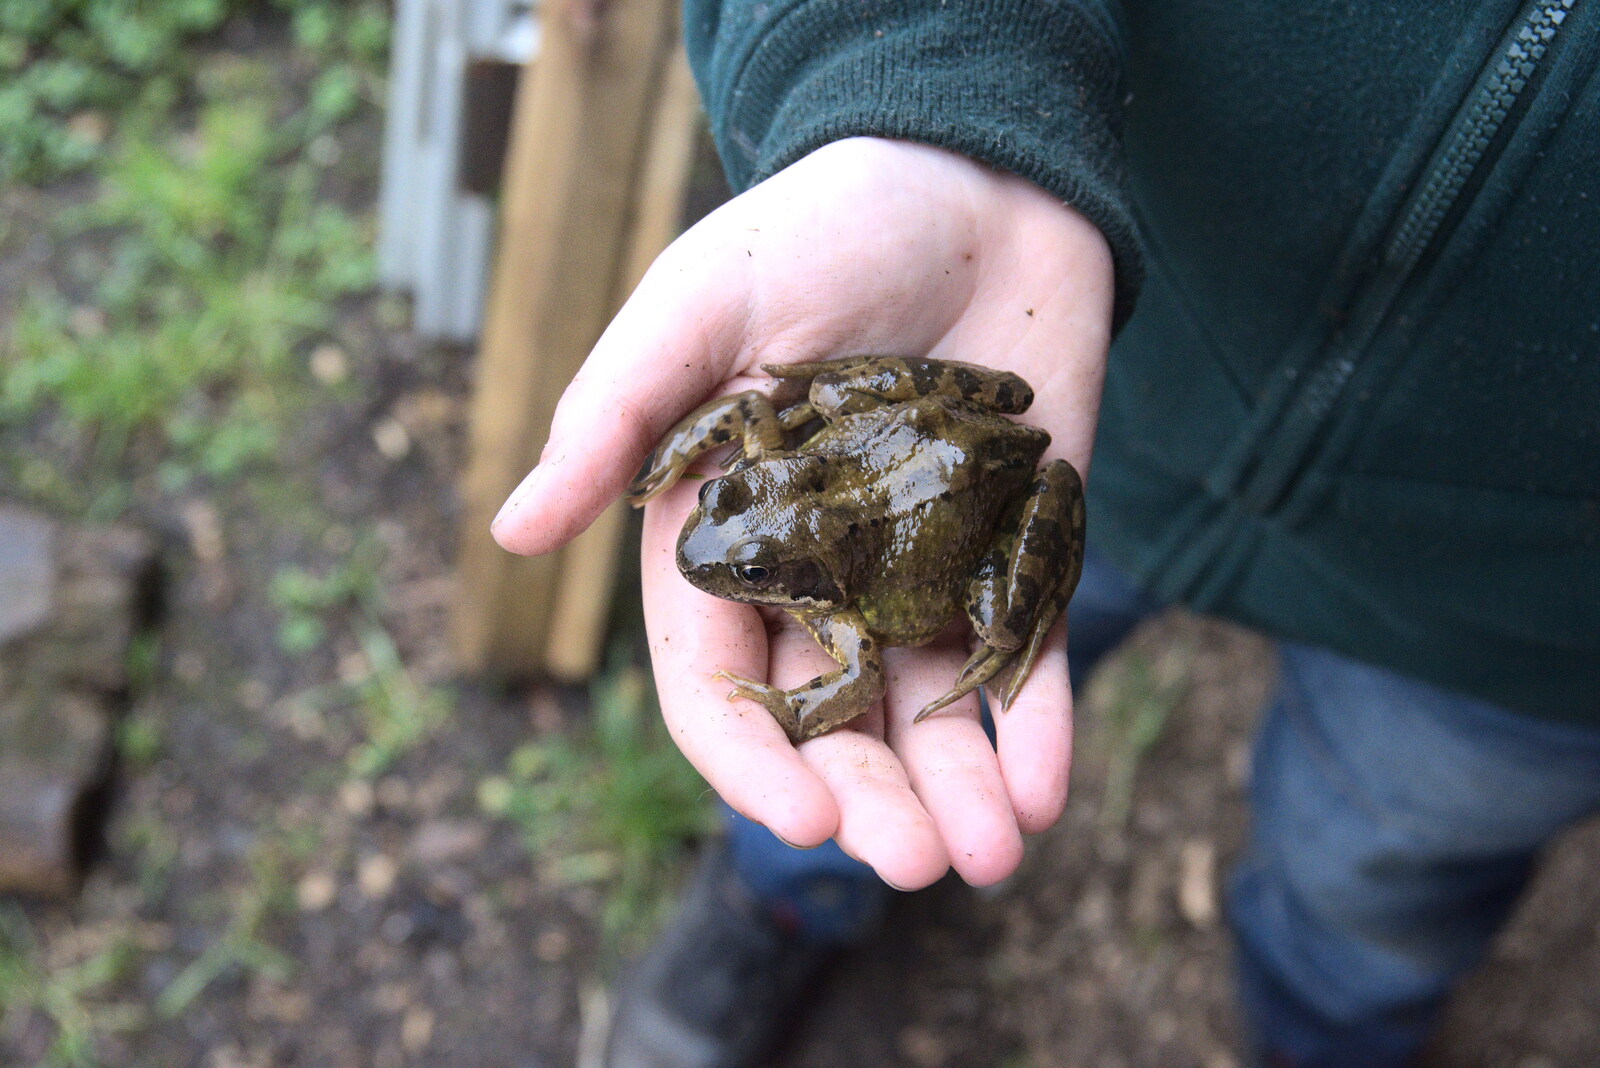 Fred finds a cool frog from Manorhamilton and Bundoran, Leitrim and Donegal, Ireland - 16th April 2022